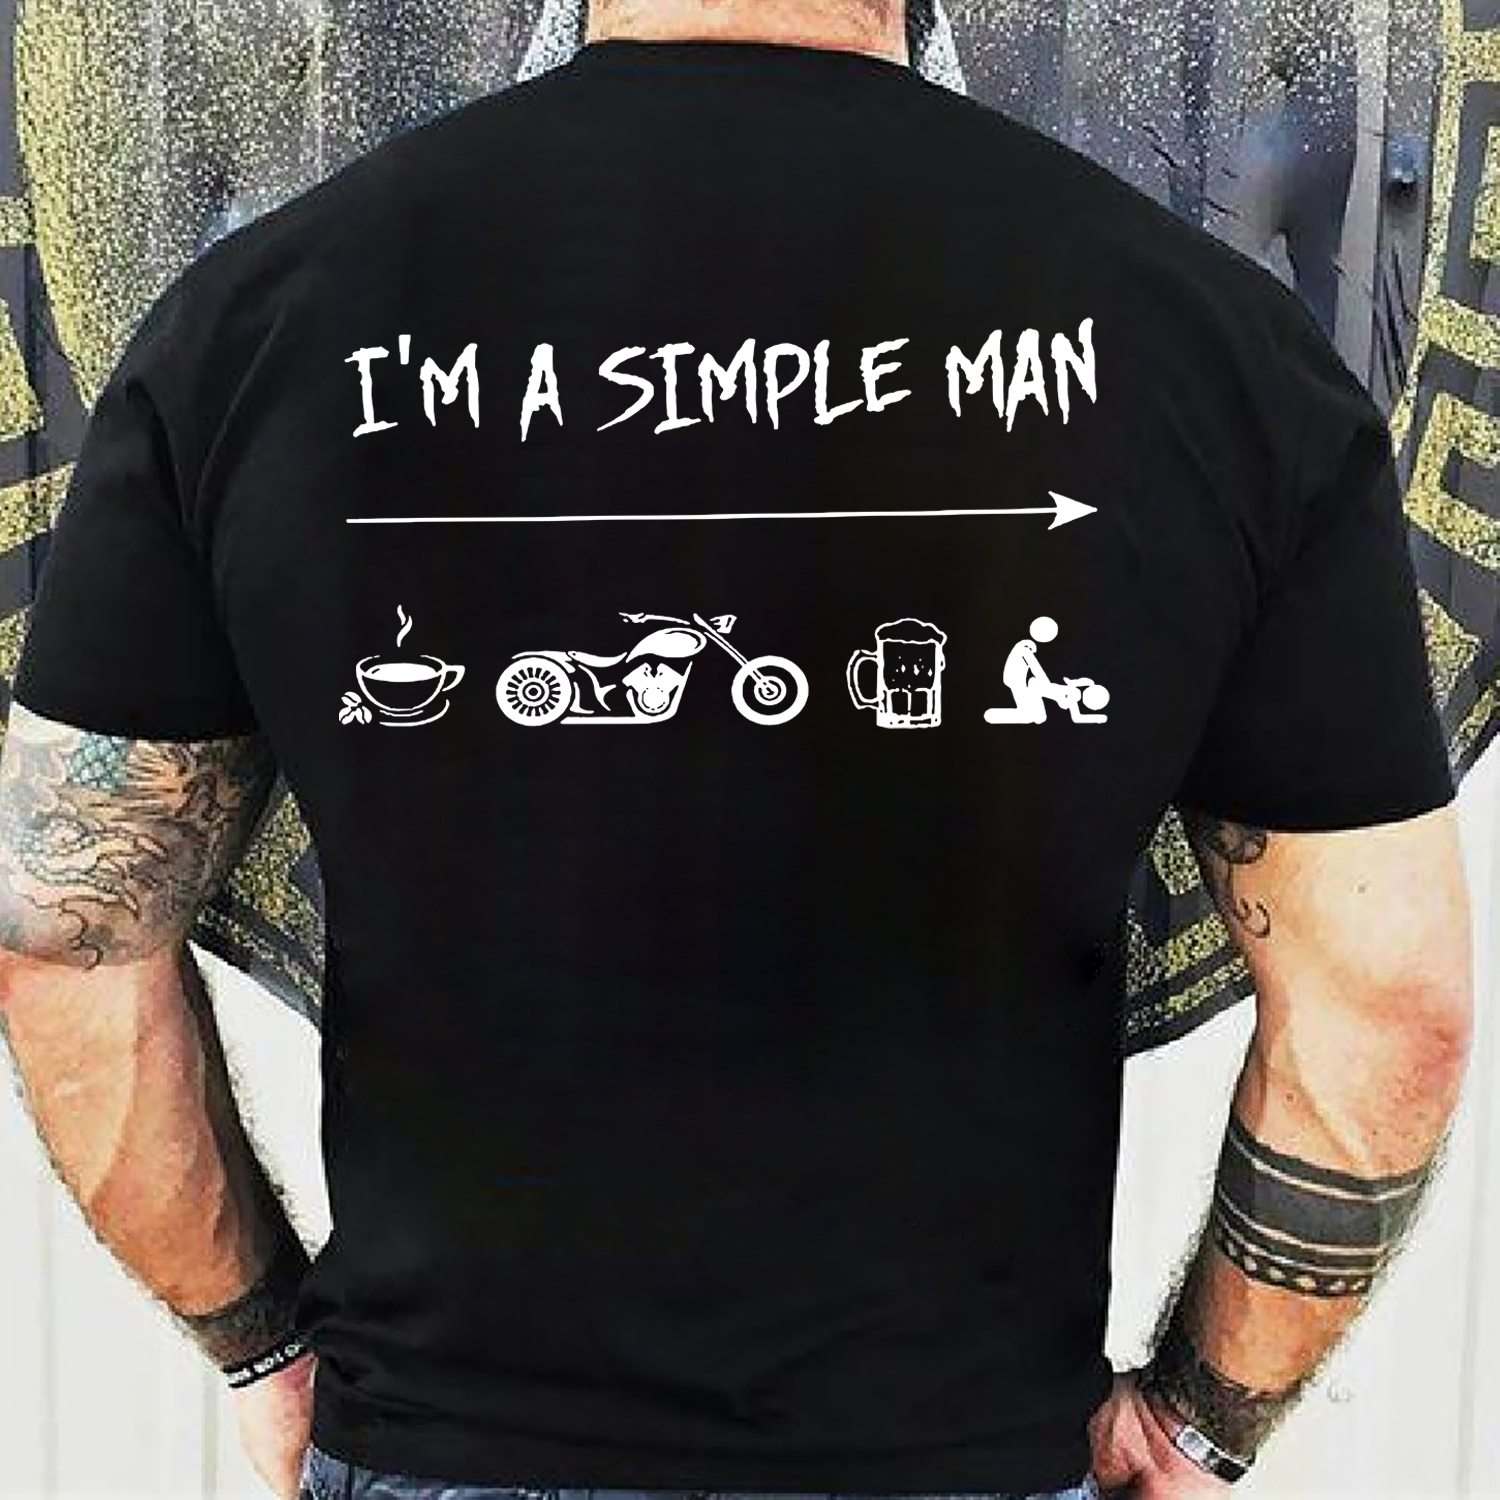 I'm a simple man - Coffee and motorcycle, beer and sex